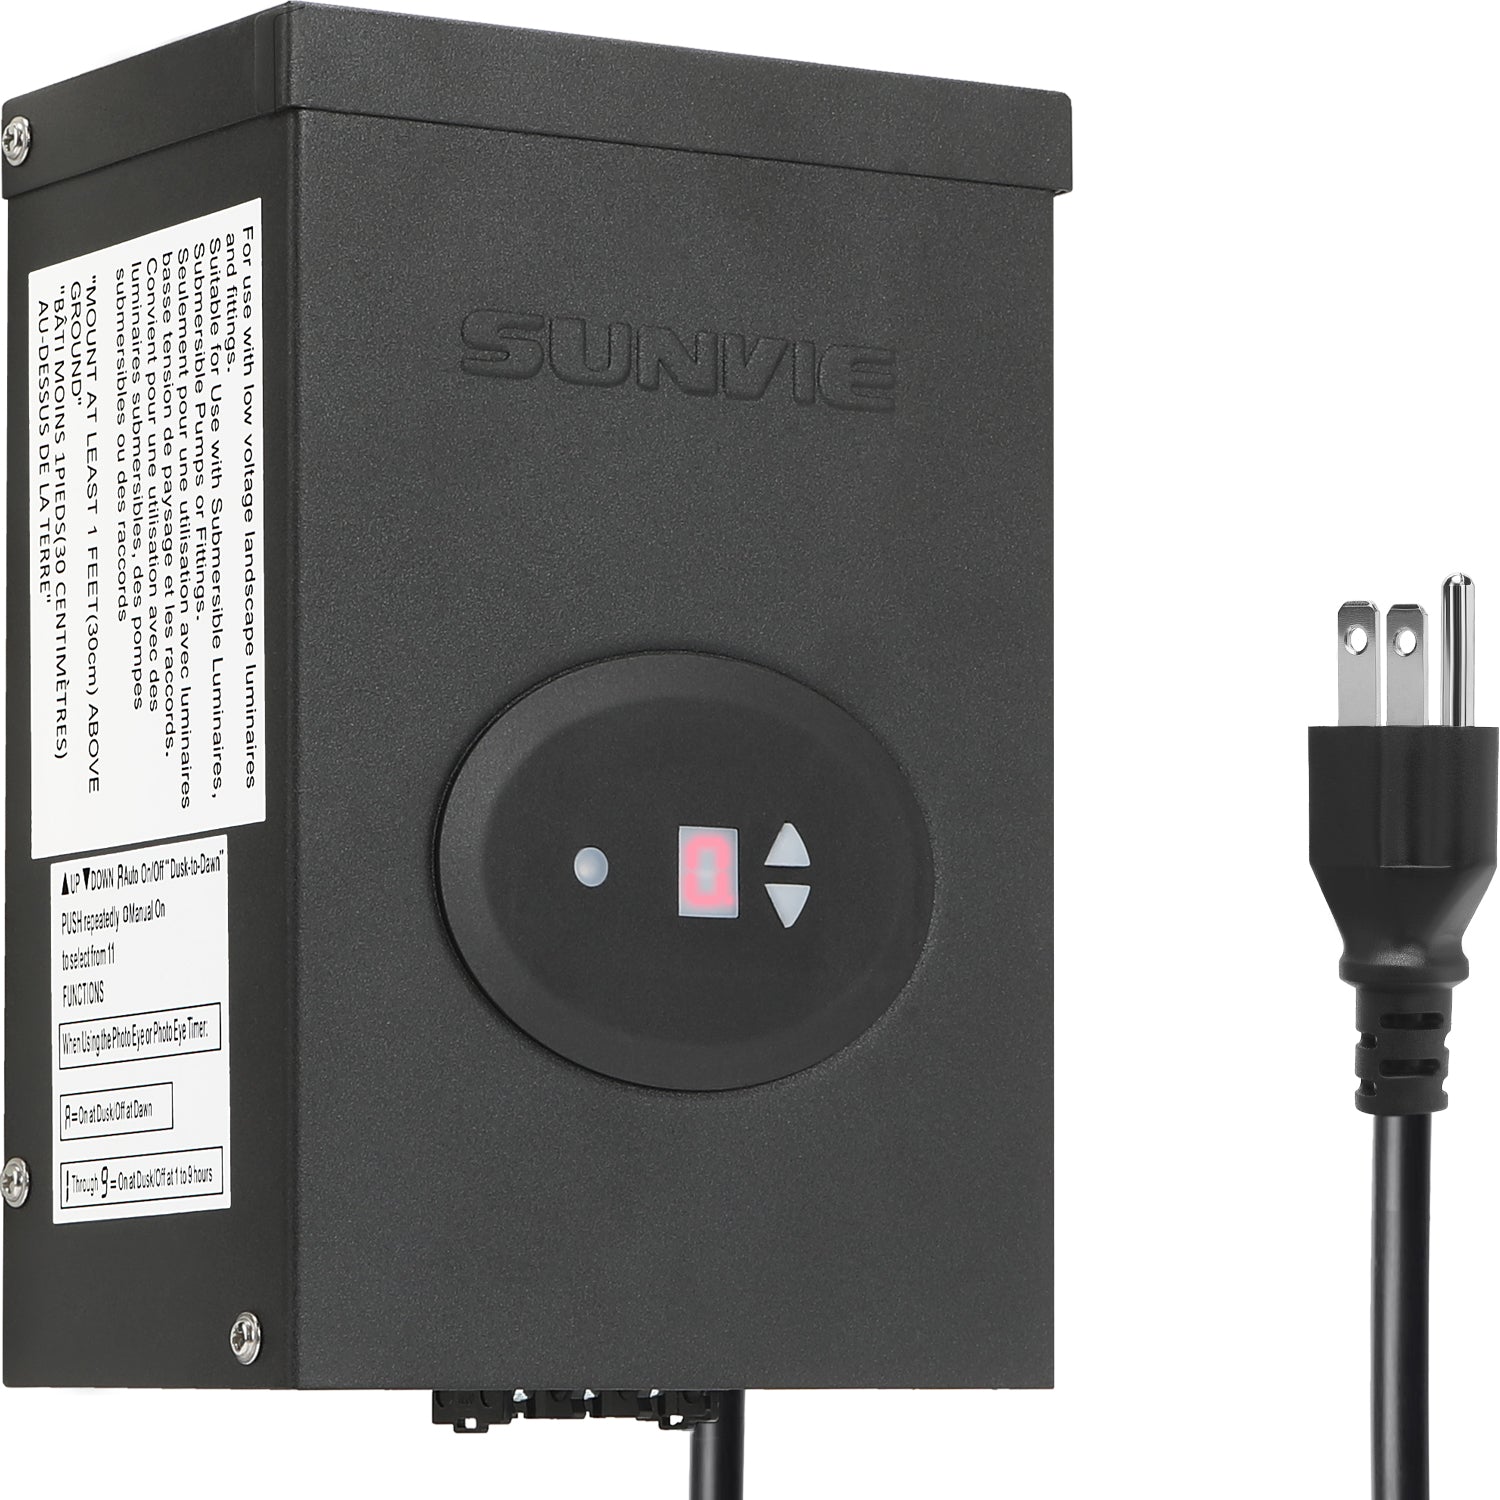 SUNVIE 300W Low Voltage Transformer for Landscape Lighting with Timer